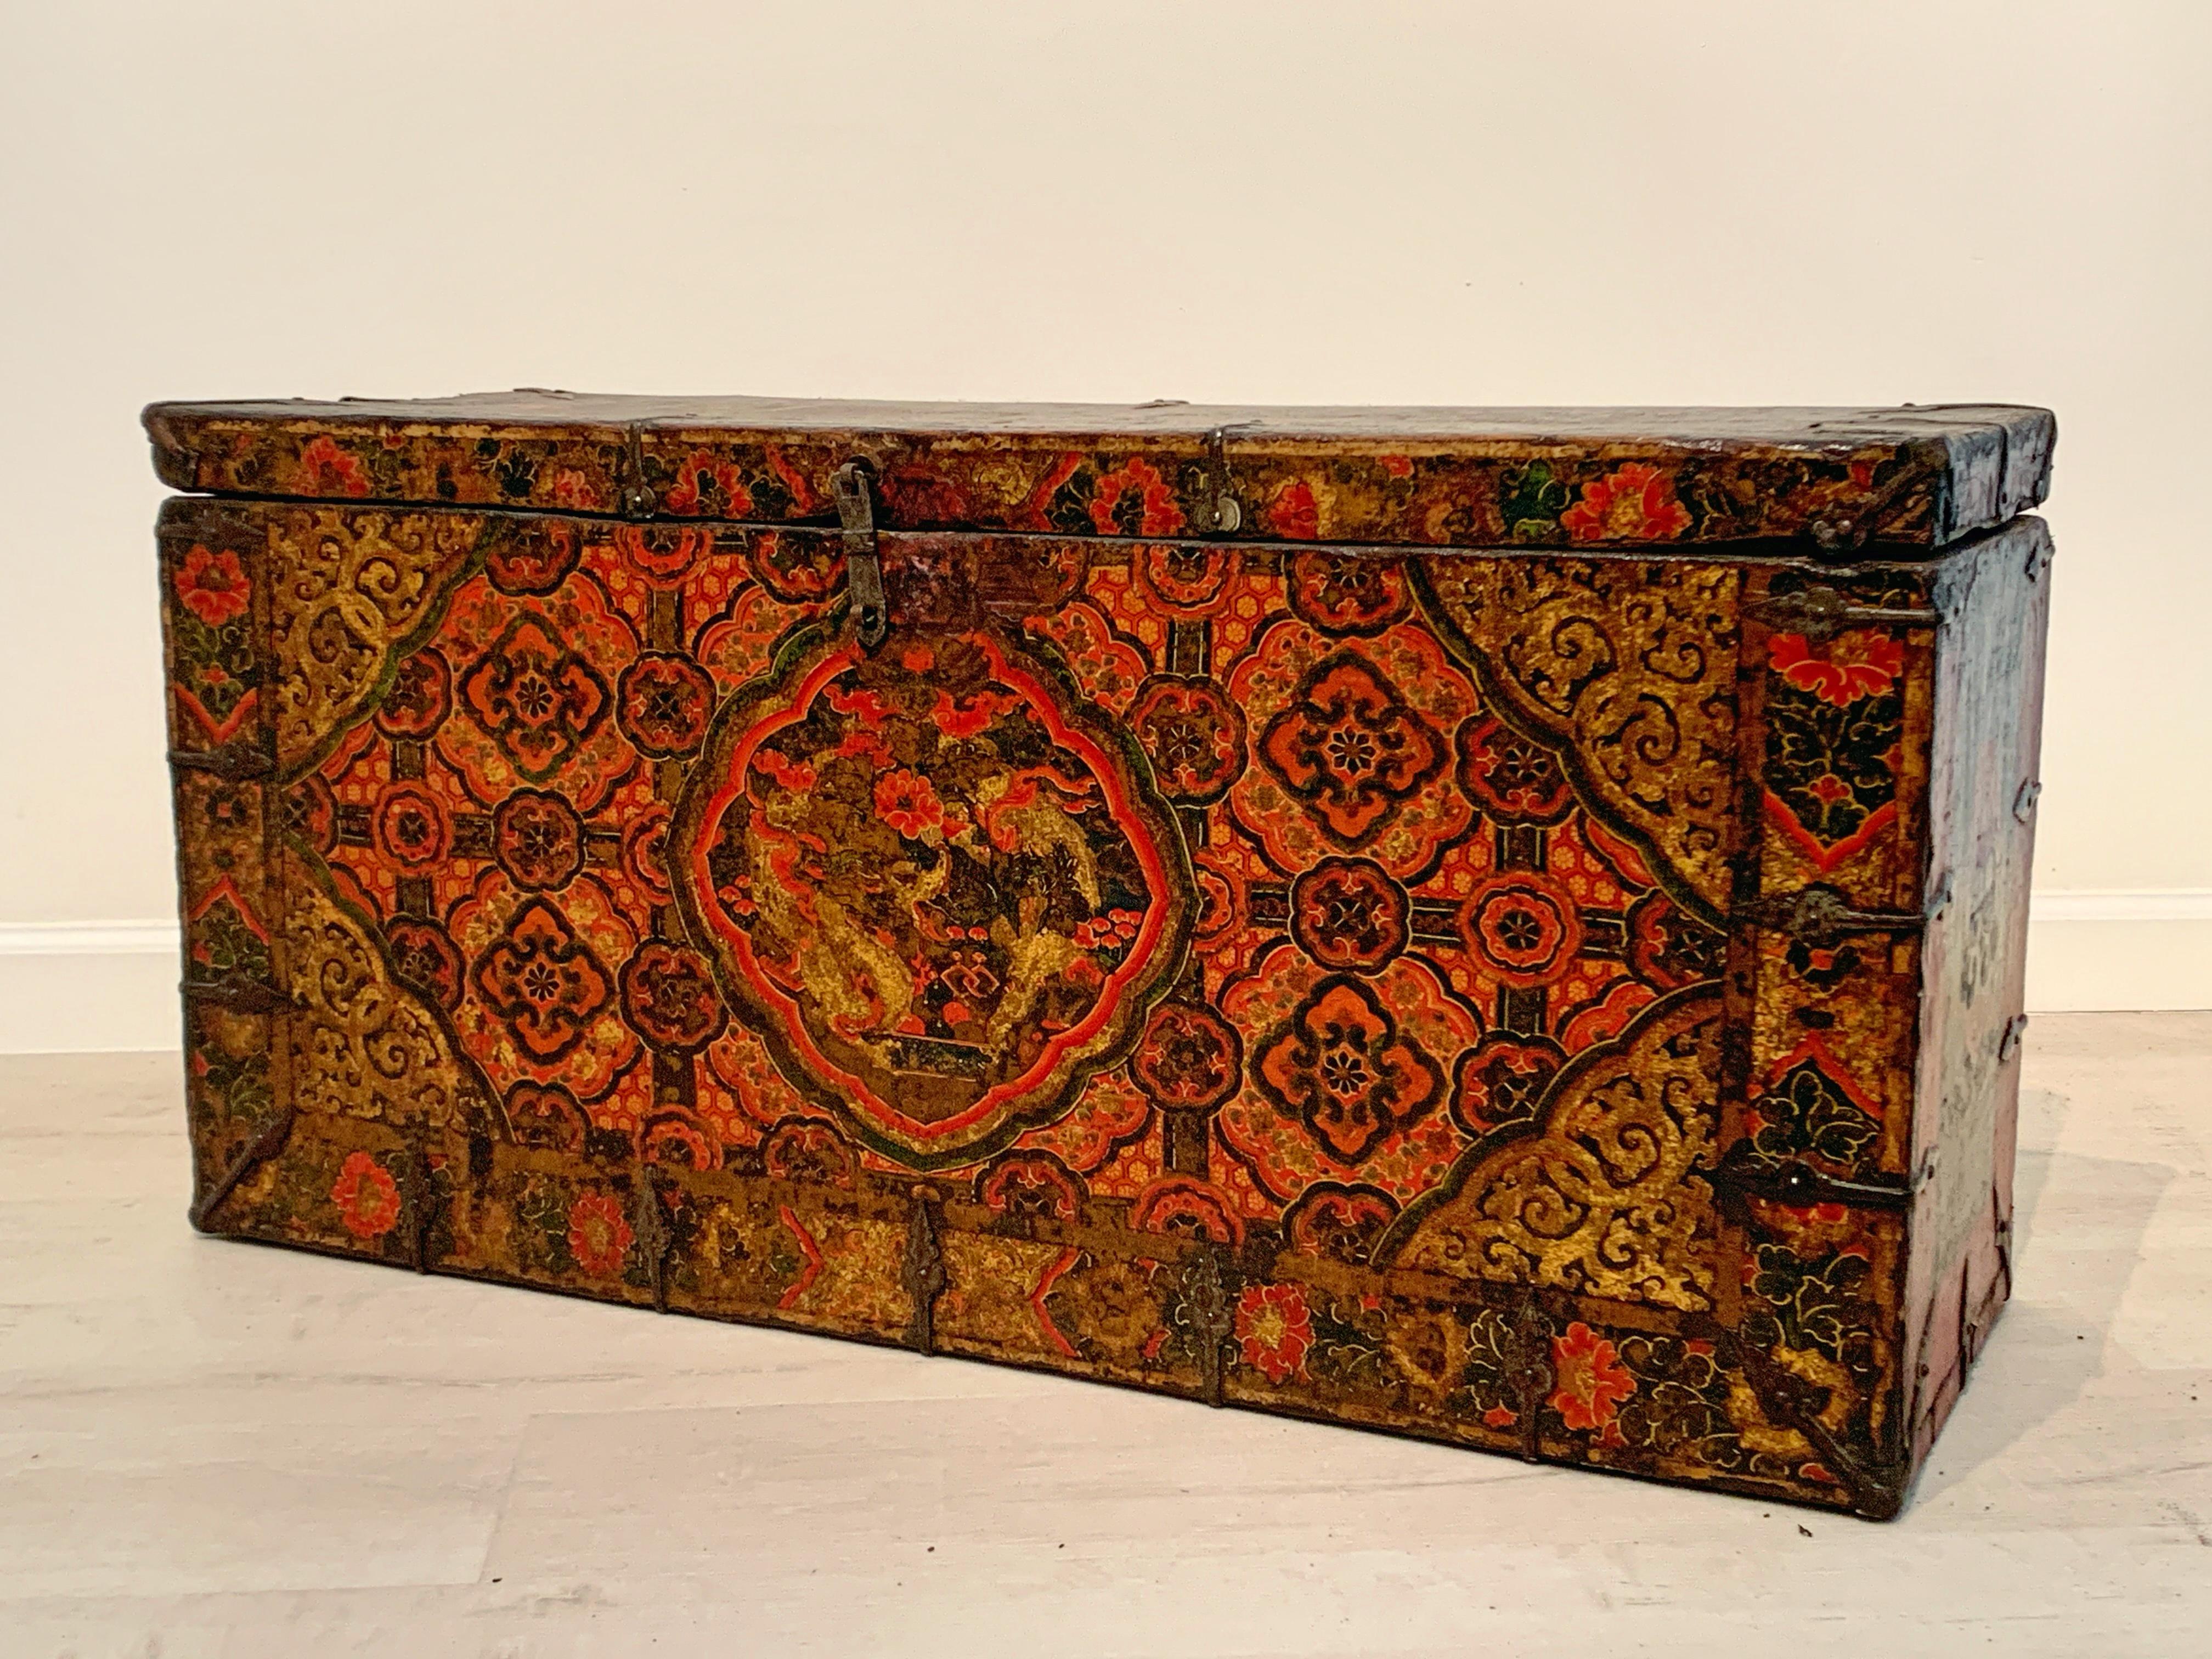 Hand-Painted Tibetan Painted Trunk with Dragon and Brocade Design, 17th-18th Century, Tibet